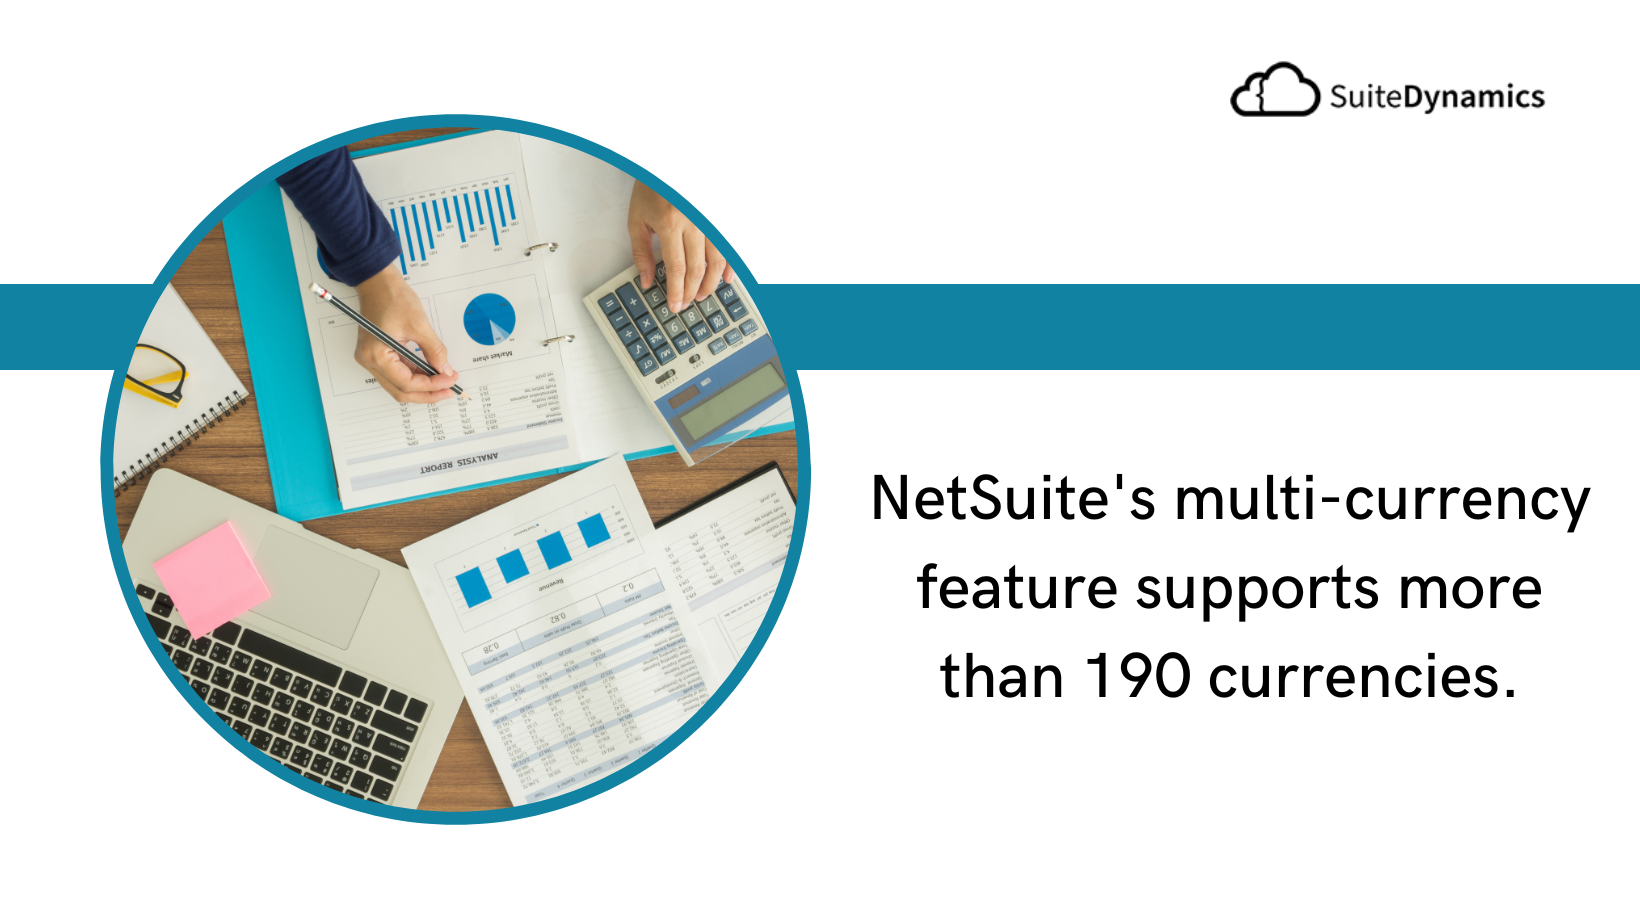 This is a graphic that illustrates the NetSuite multi-currency feature.